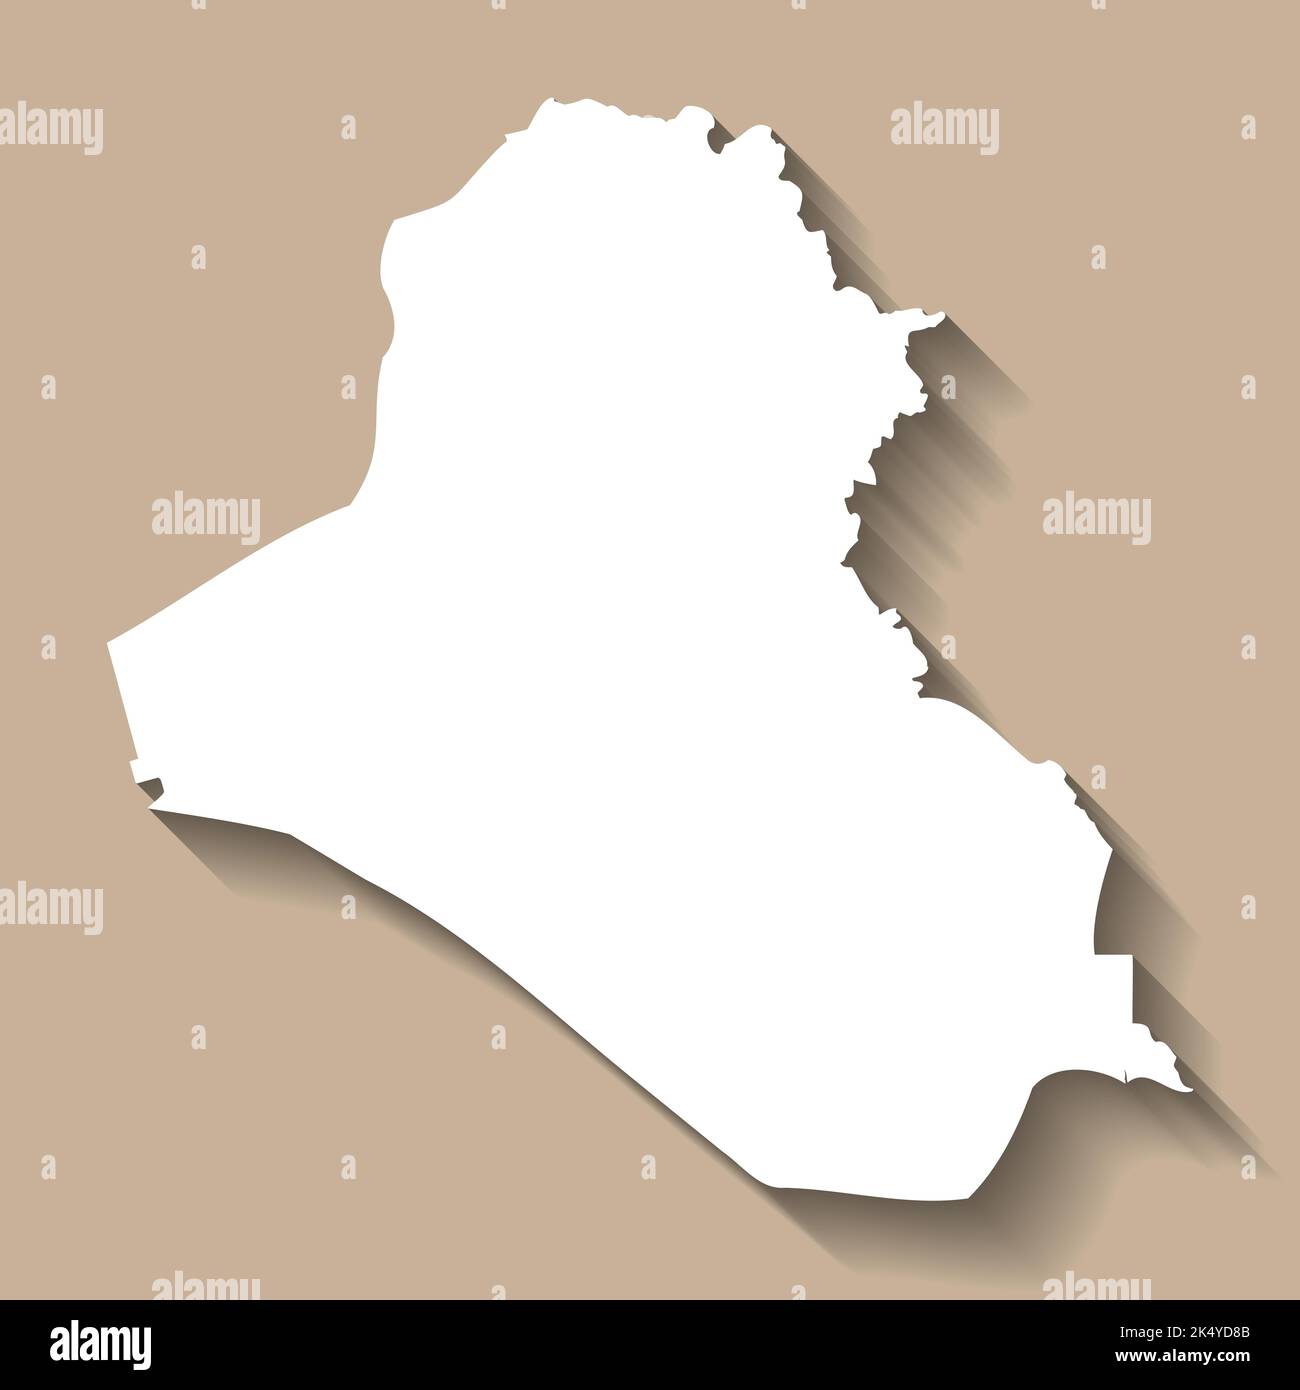 Iraq vector country map silhouette Stock Vector